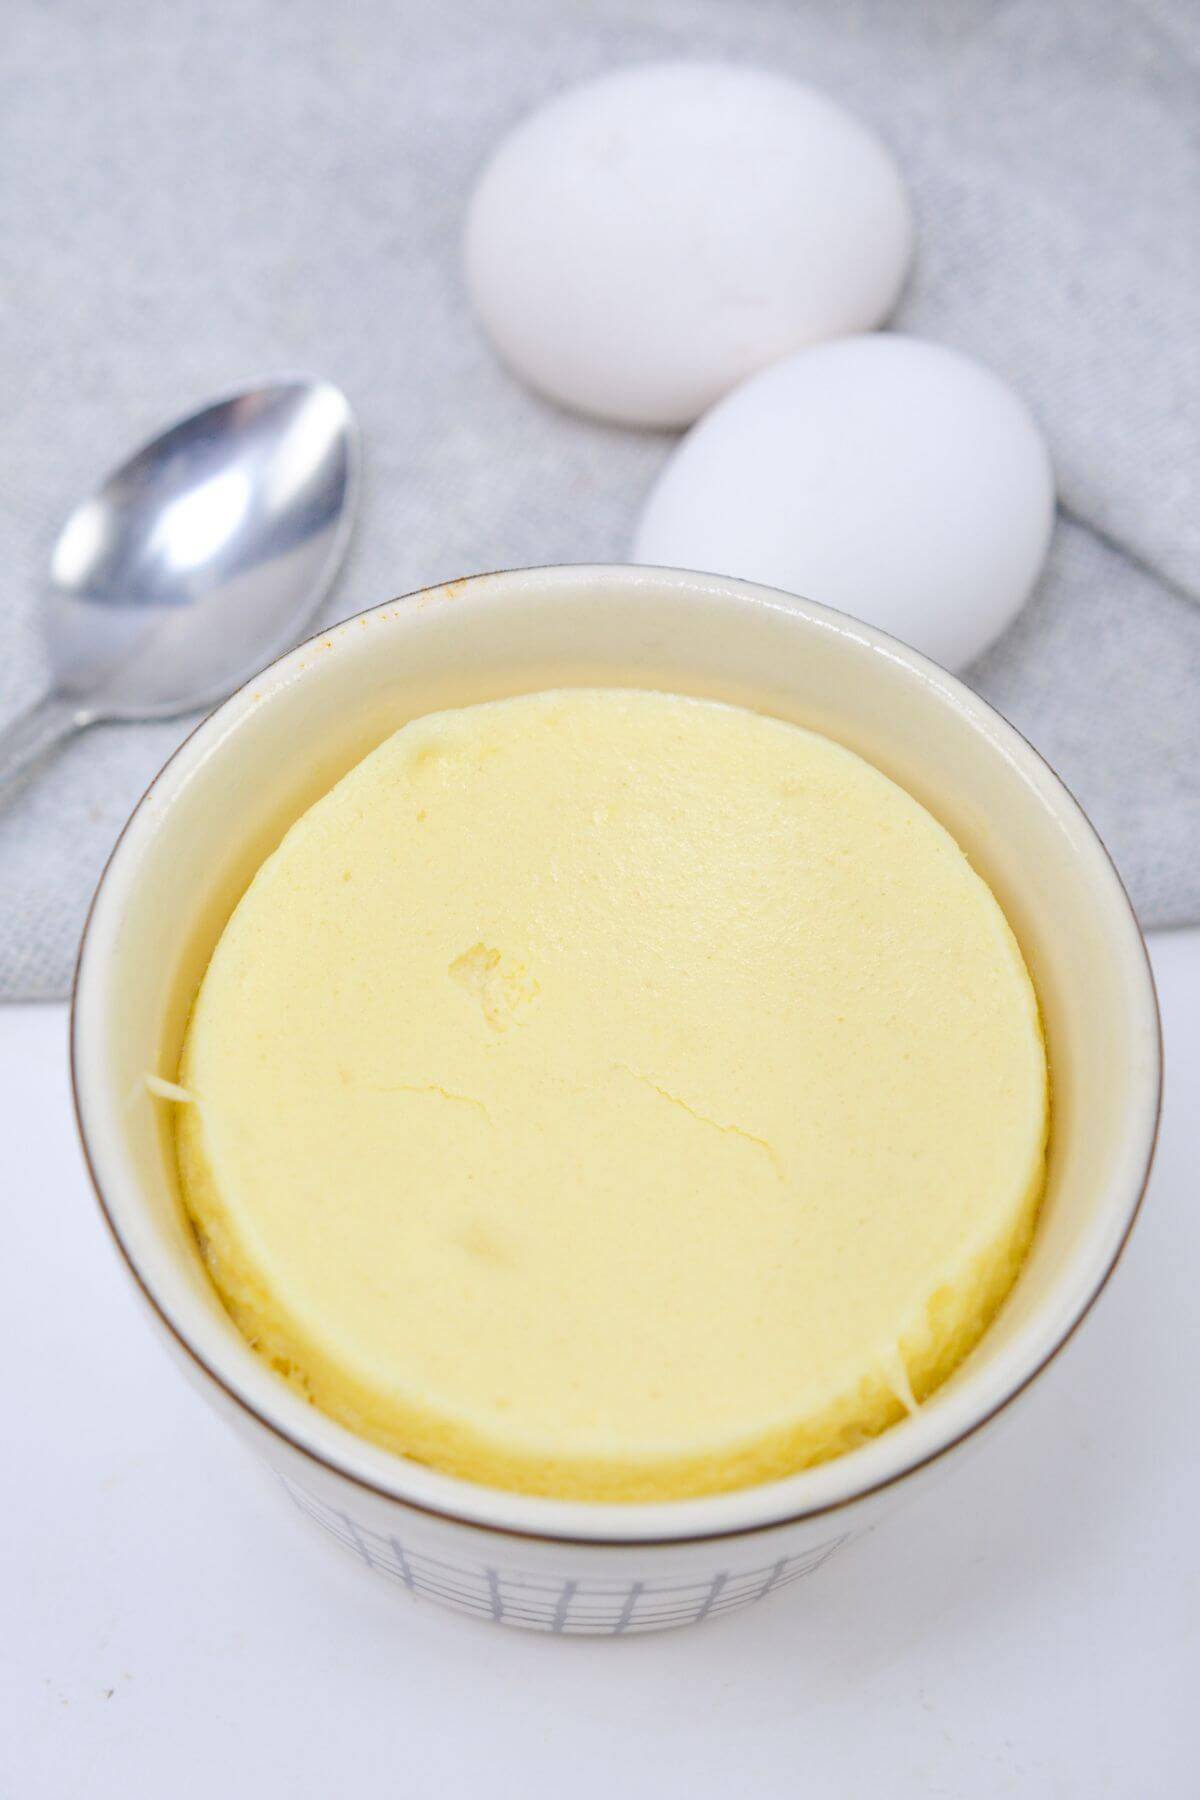 Baked souffle cheesecake with spoon and eggs.